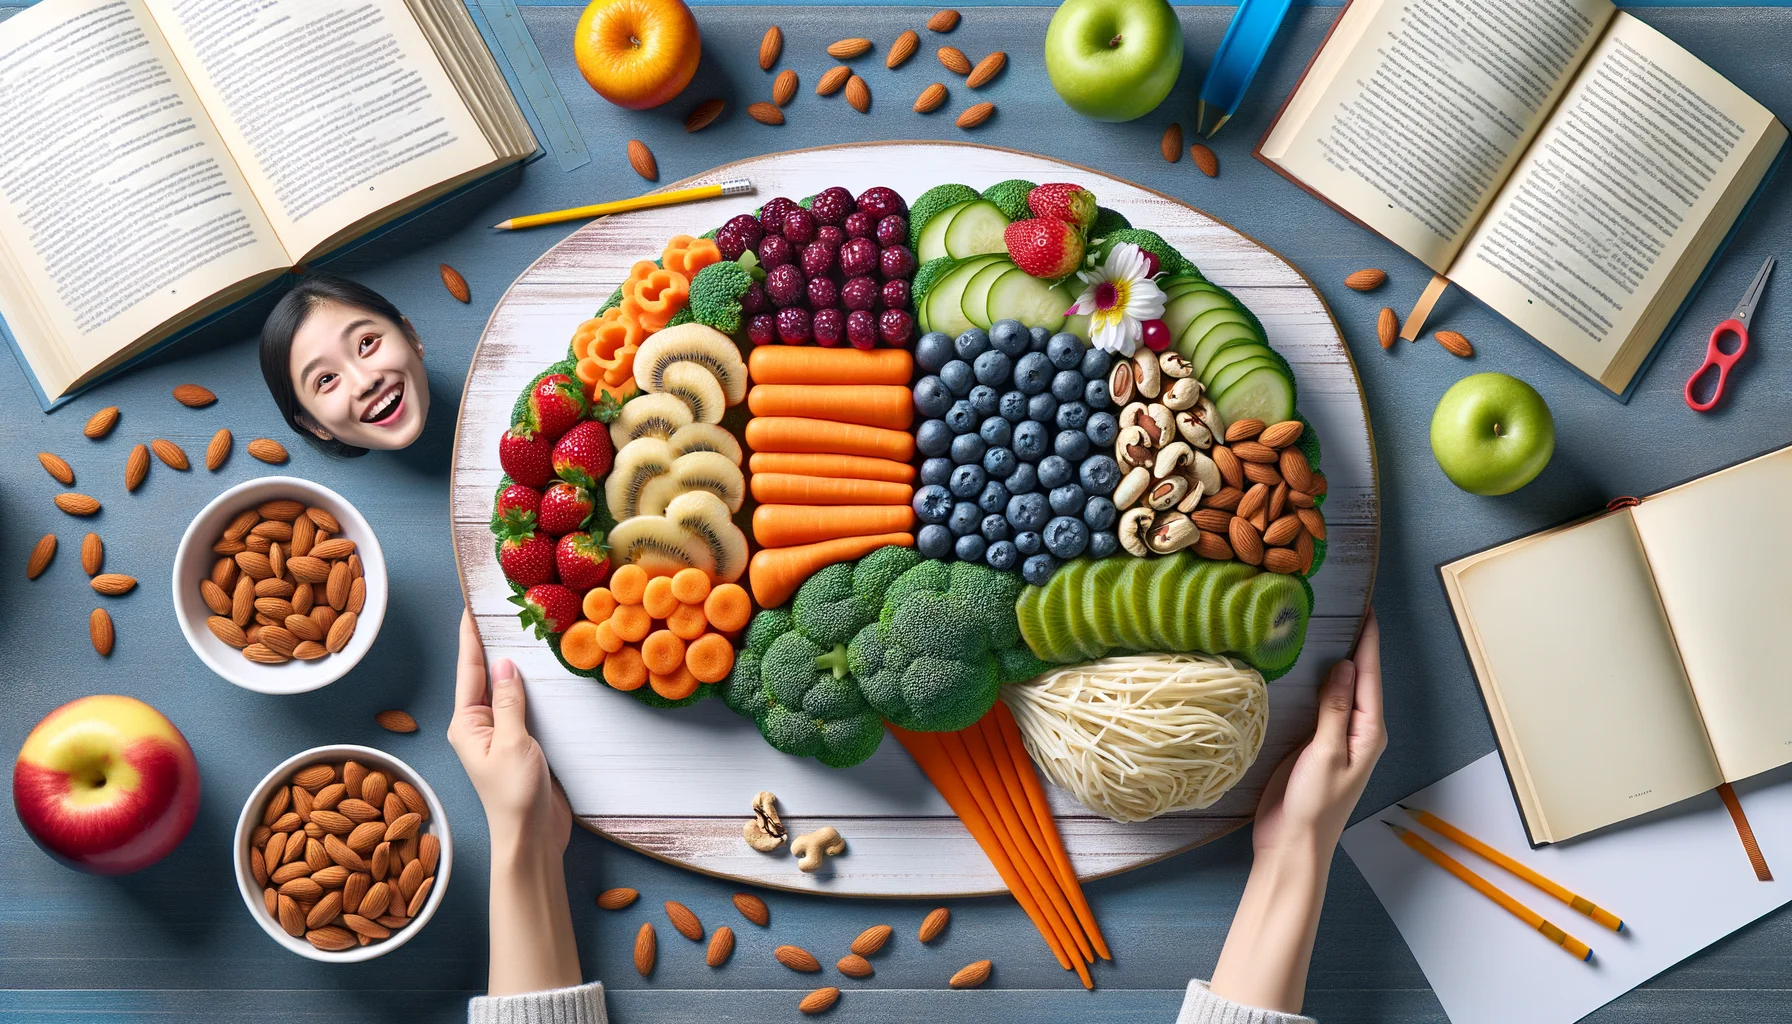 Create a humorous and realistic image of a brain-shaped platter filled with an assortment of brightly colored fruits, vegetables and nuts. On the platter, show a variety of snack options including blueberries, almonds, and baby carrots arranged in a highly organized pattern. Surrounding the platter, show several open books and school supplies, symbolizing the student environment. Nearby, feature a South Asian female student with a joyful expression, proudly presenting her brain-boosting snacks, while a Caucasian male student enthusiastically reaches for the healthy snacks, depicting the perfect scenario for brain-boosting healthy snacks for students.